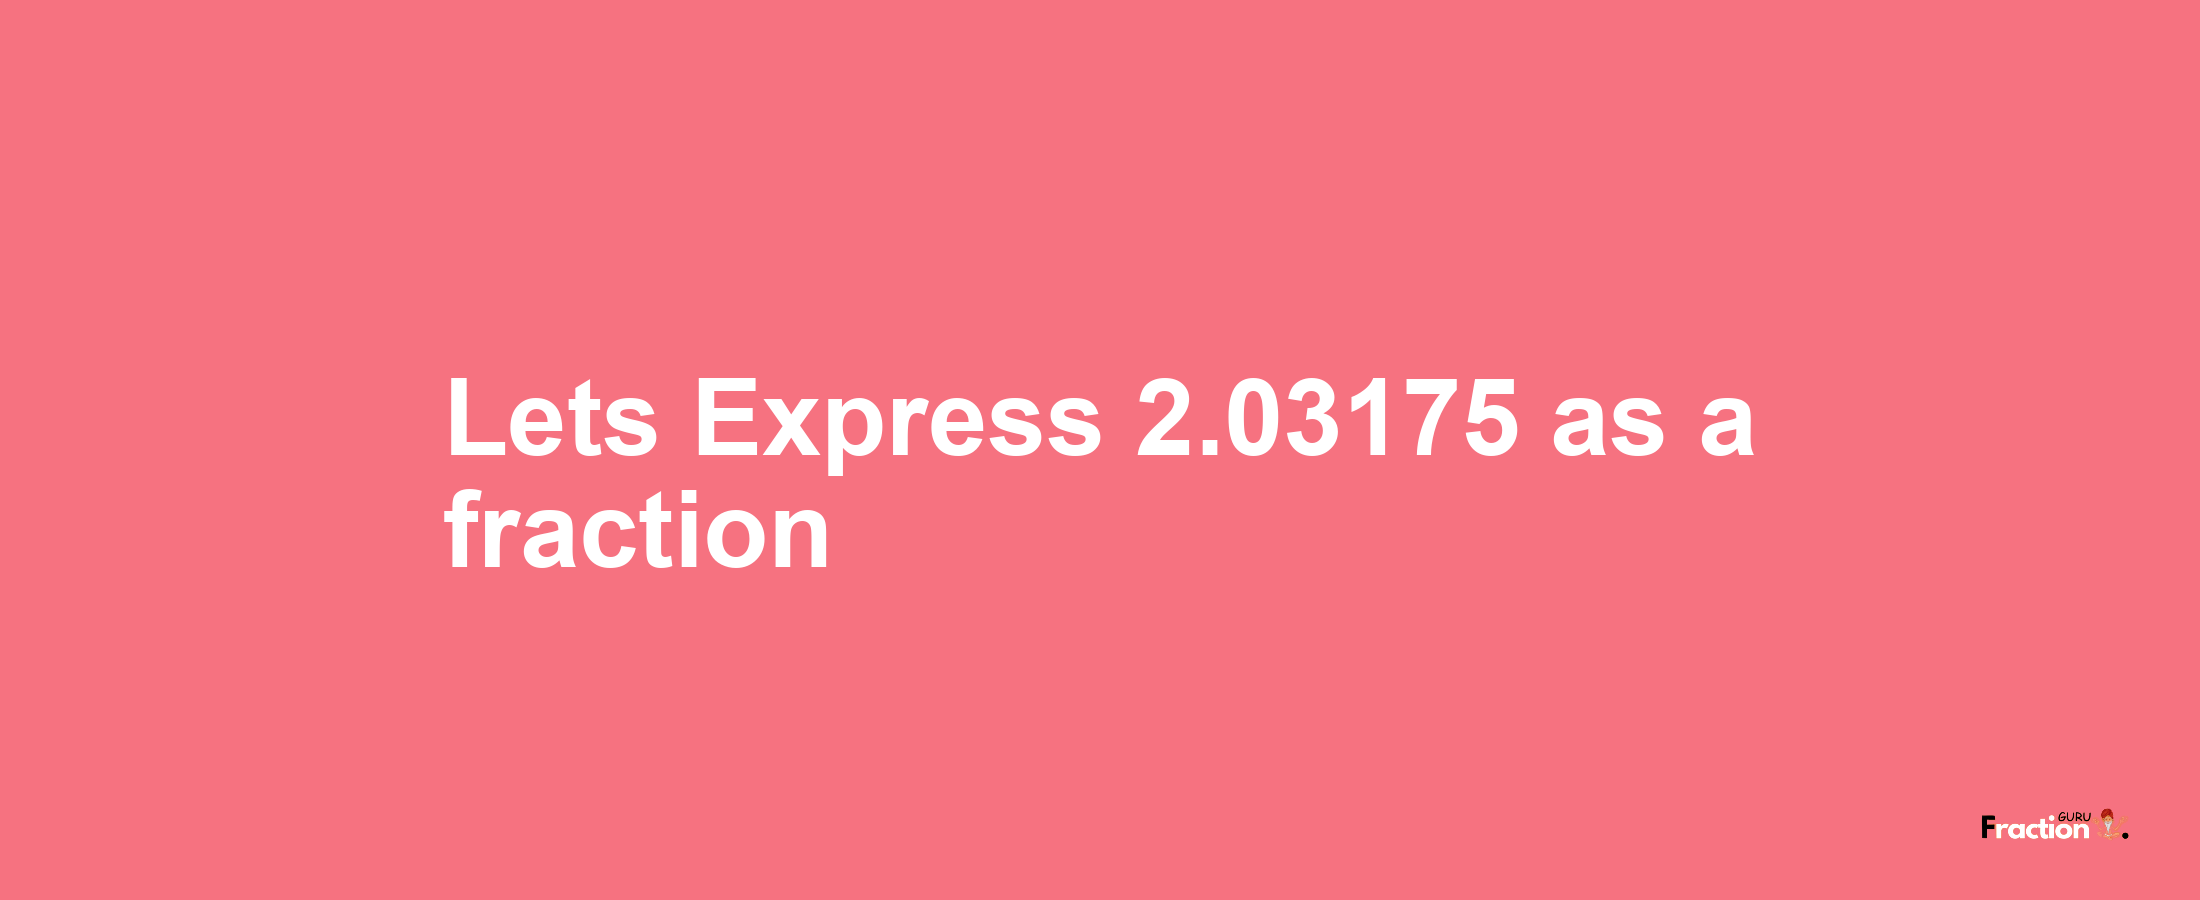 Lets Express 2.03175 as afraction